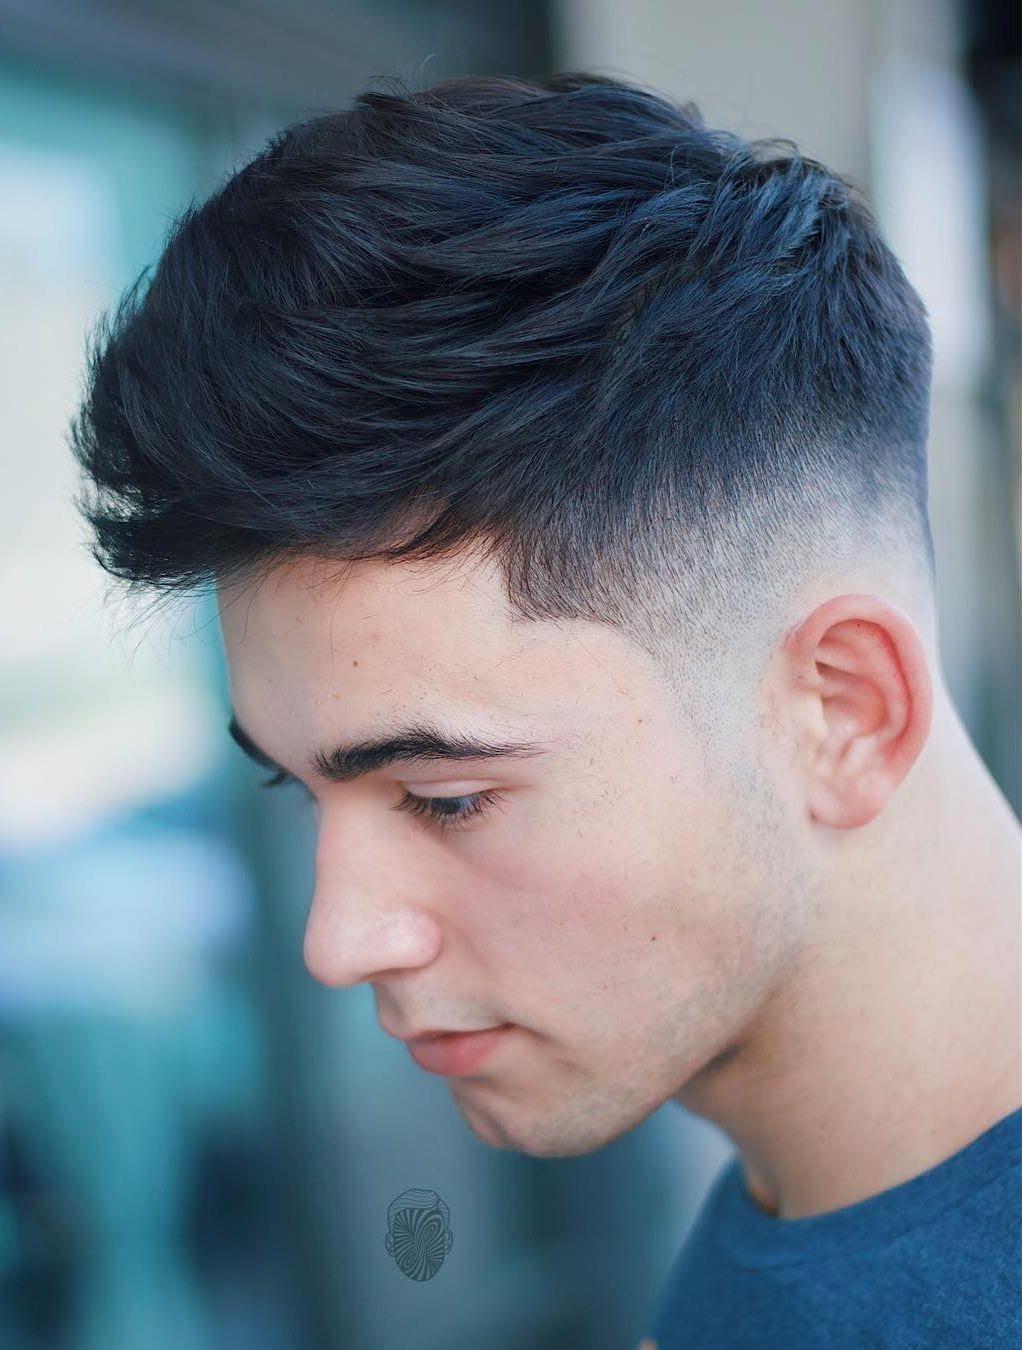 Haircuts For Boys With Thick Hair
 50 Best Hairstyles for Teenage Boys The Ultimate Guide 2019